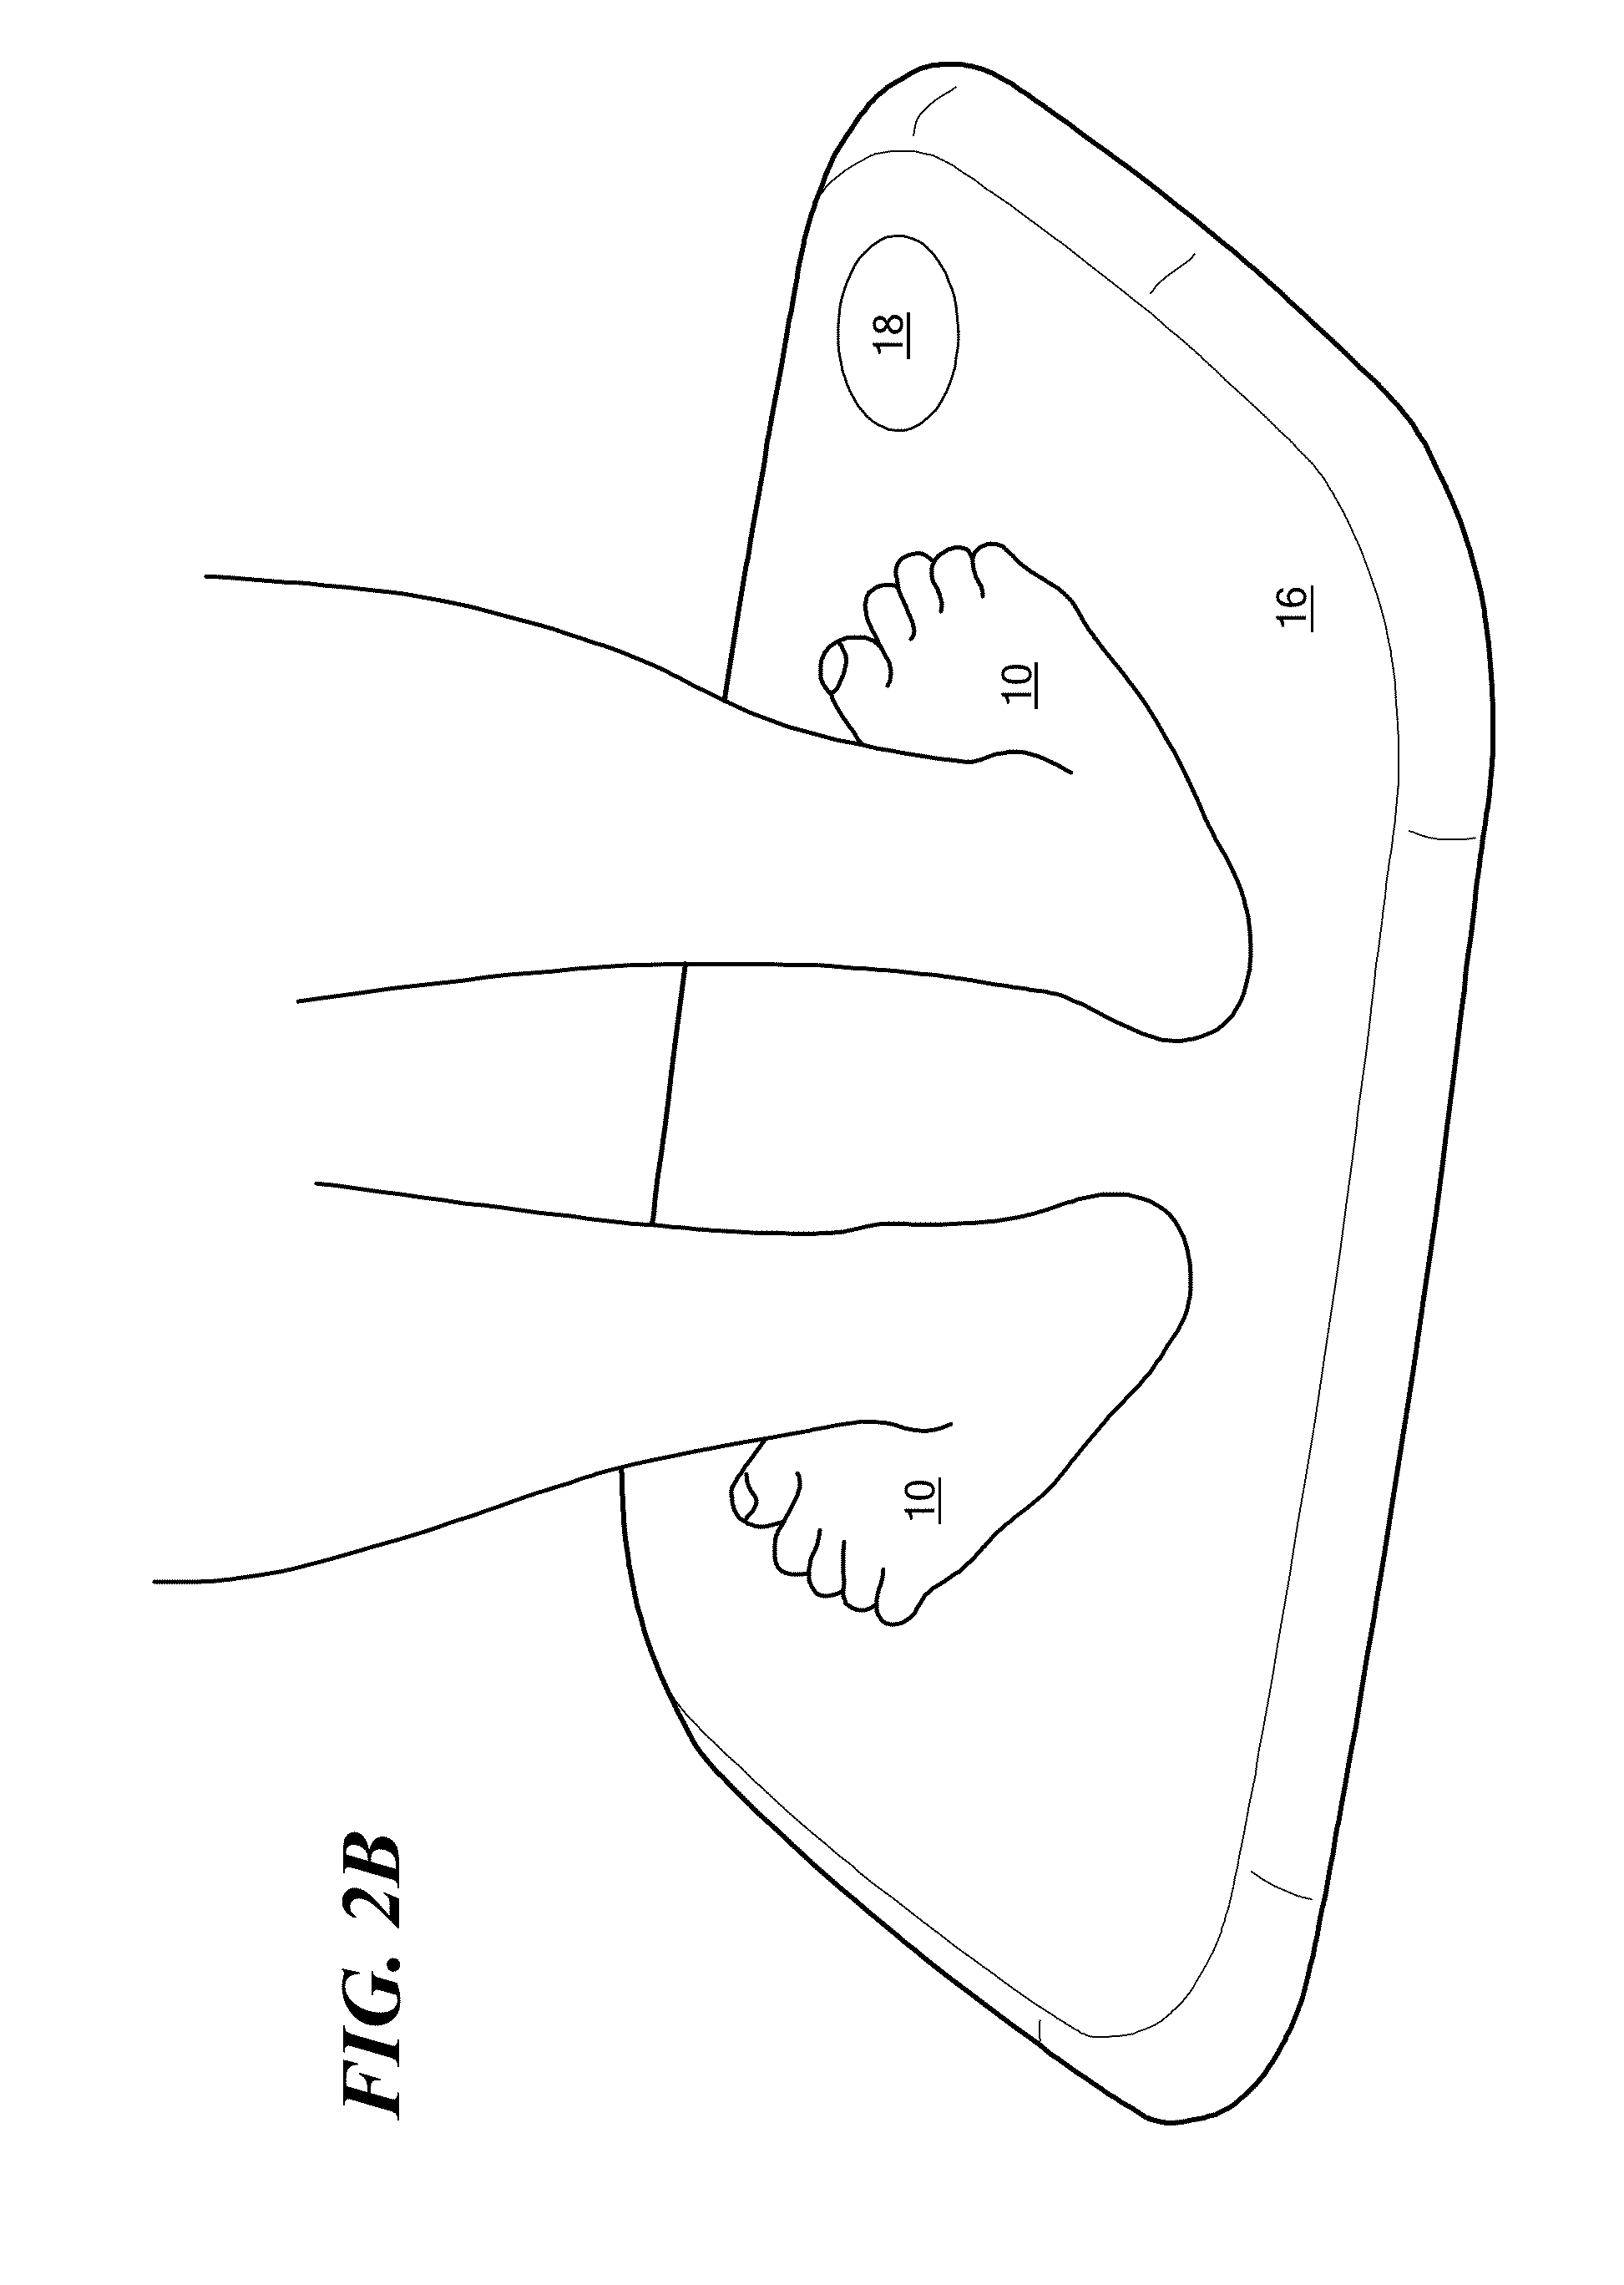 Method and Apparatus for Indicating the Risk of an Emerging Ulcer